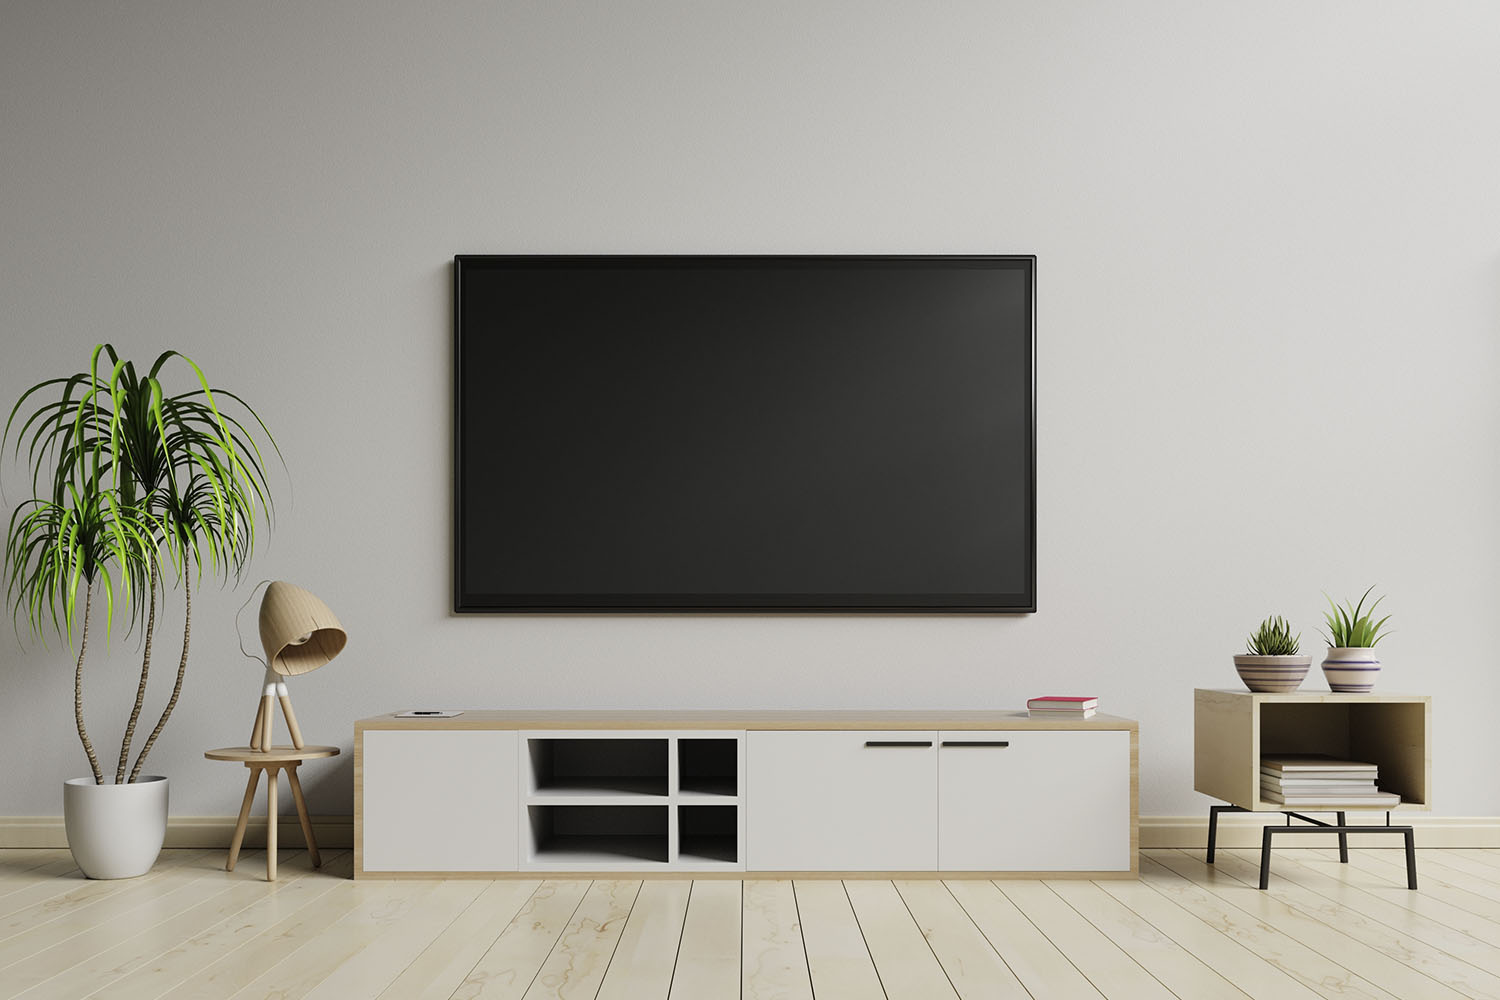 Attention renters: you can now mount your TV without damaging the wall.